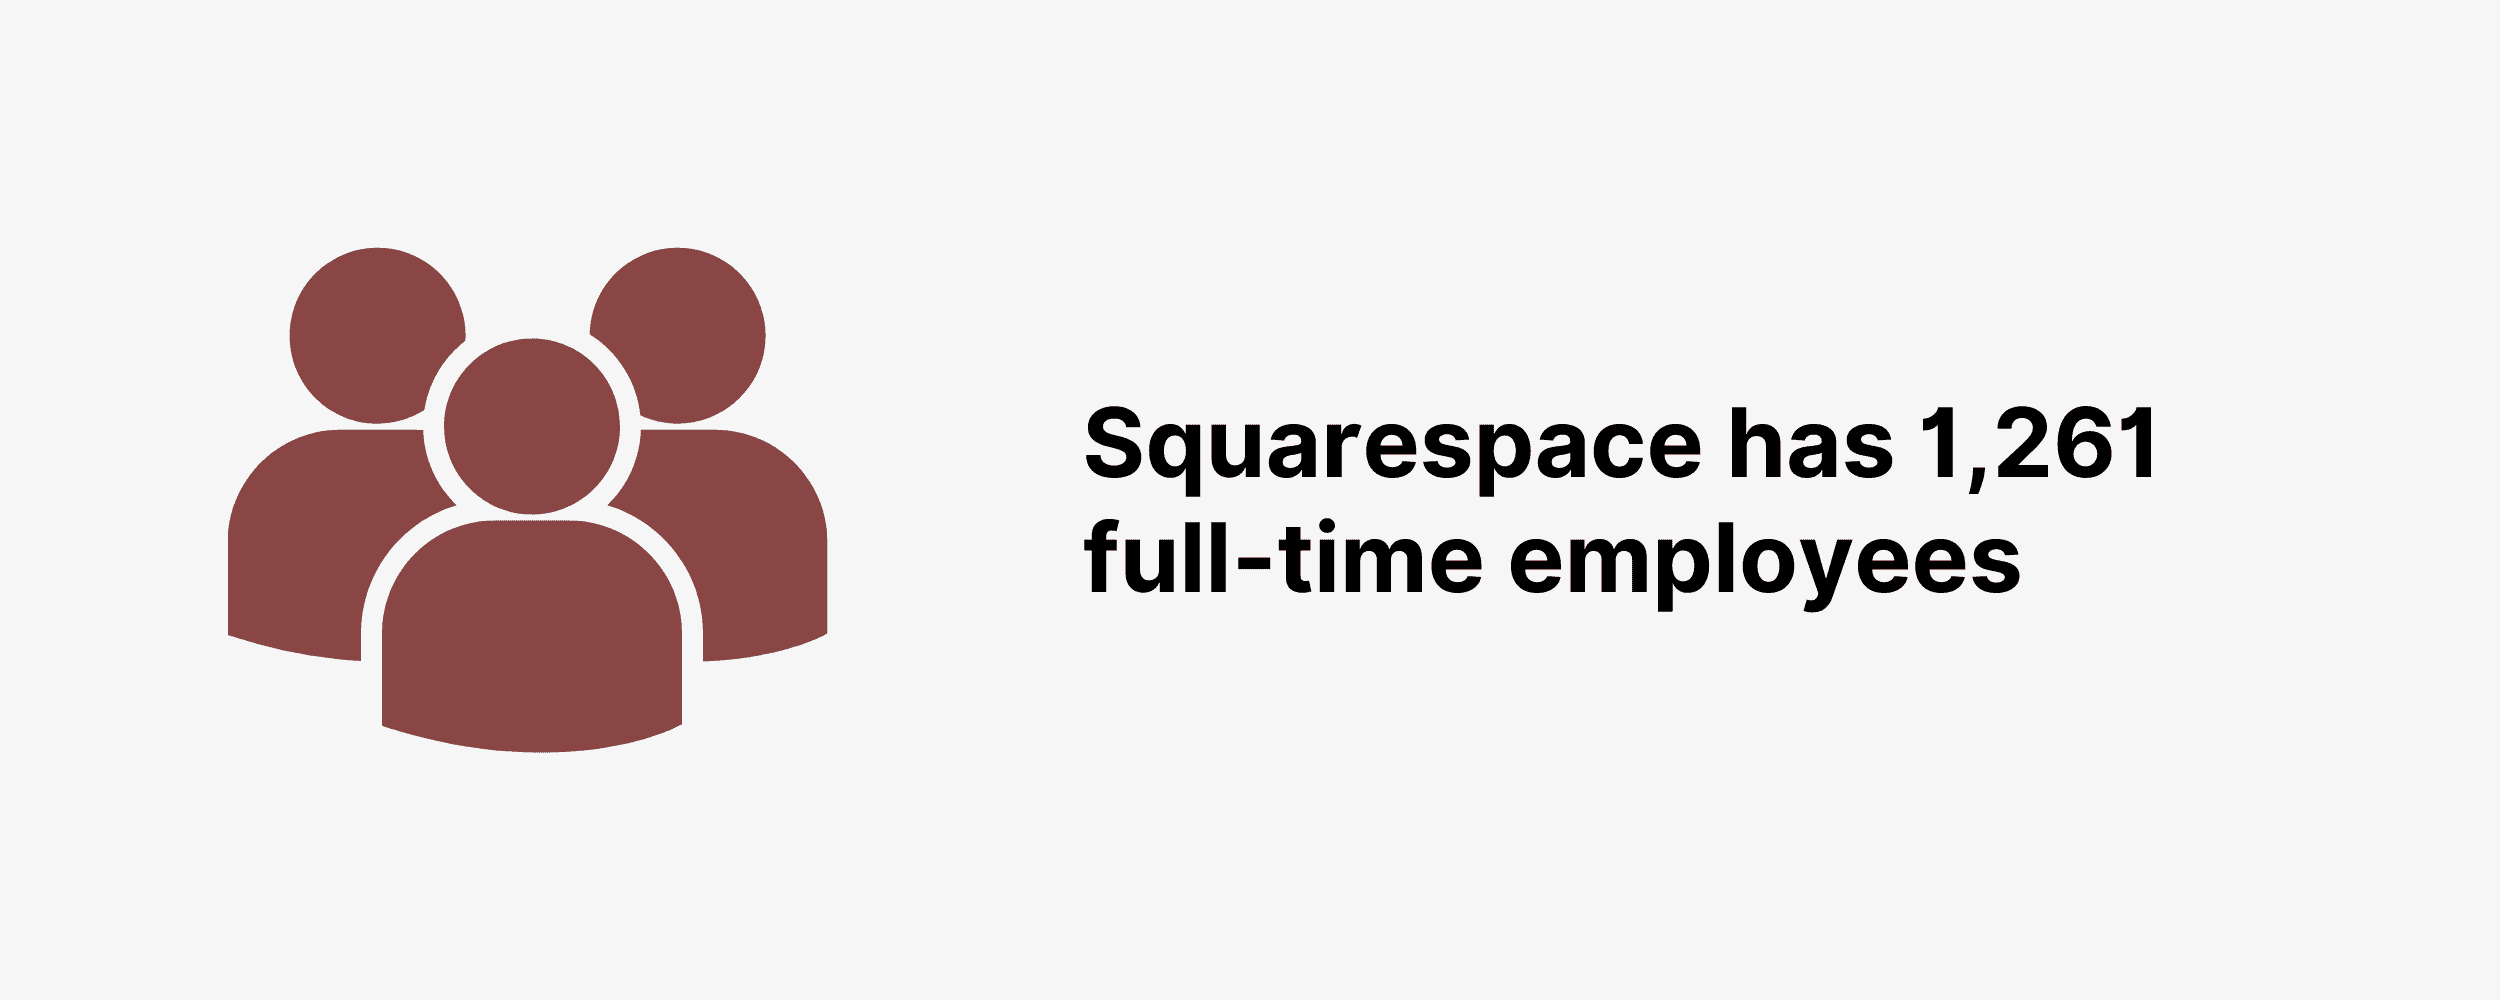 Squarespace has 1,261 full-time employees